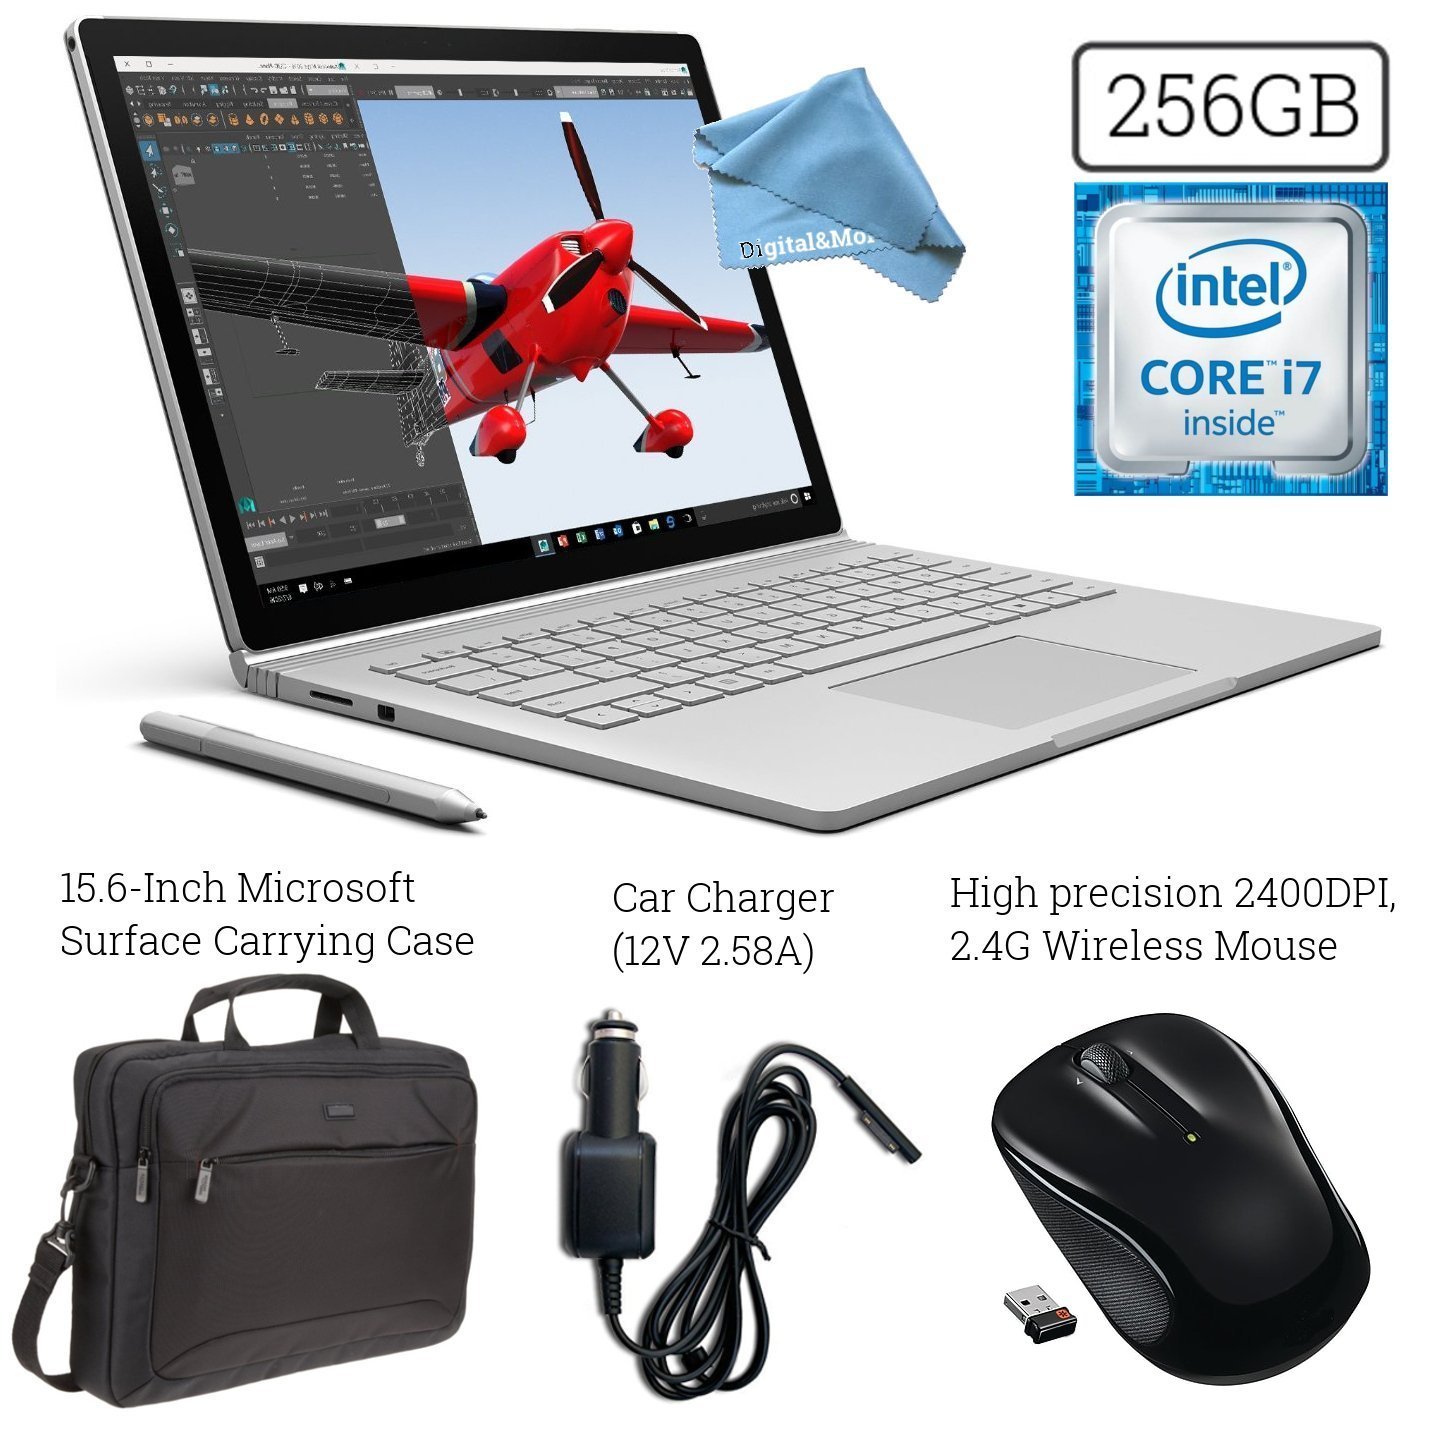 MICROSOFT SURFACE BOOK (256GB SSD, 8GB RAM, INTEL 6th GEN INTEL i7 + 15.6-INCH MICROSOFT SURFACE CARRYING CASE + 2.4G WIRELESS PORTABLE MOBILE OPTICAL MOUSE + CAR CHARGER + DigitalAndMore Cloth